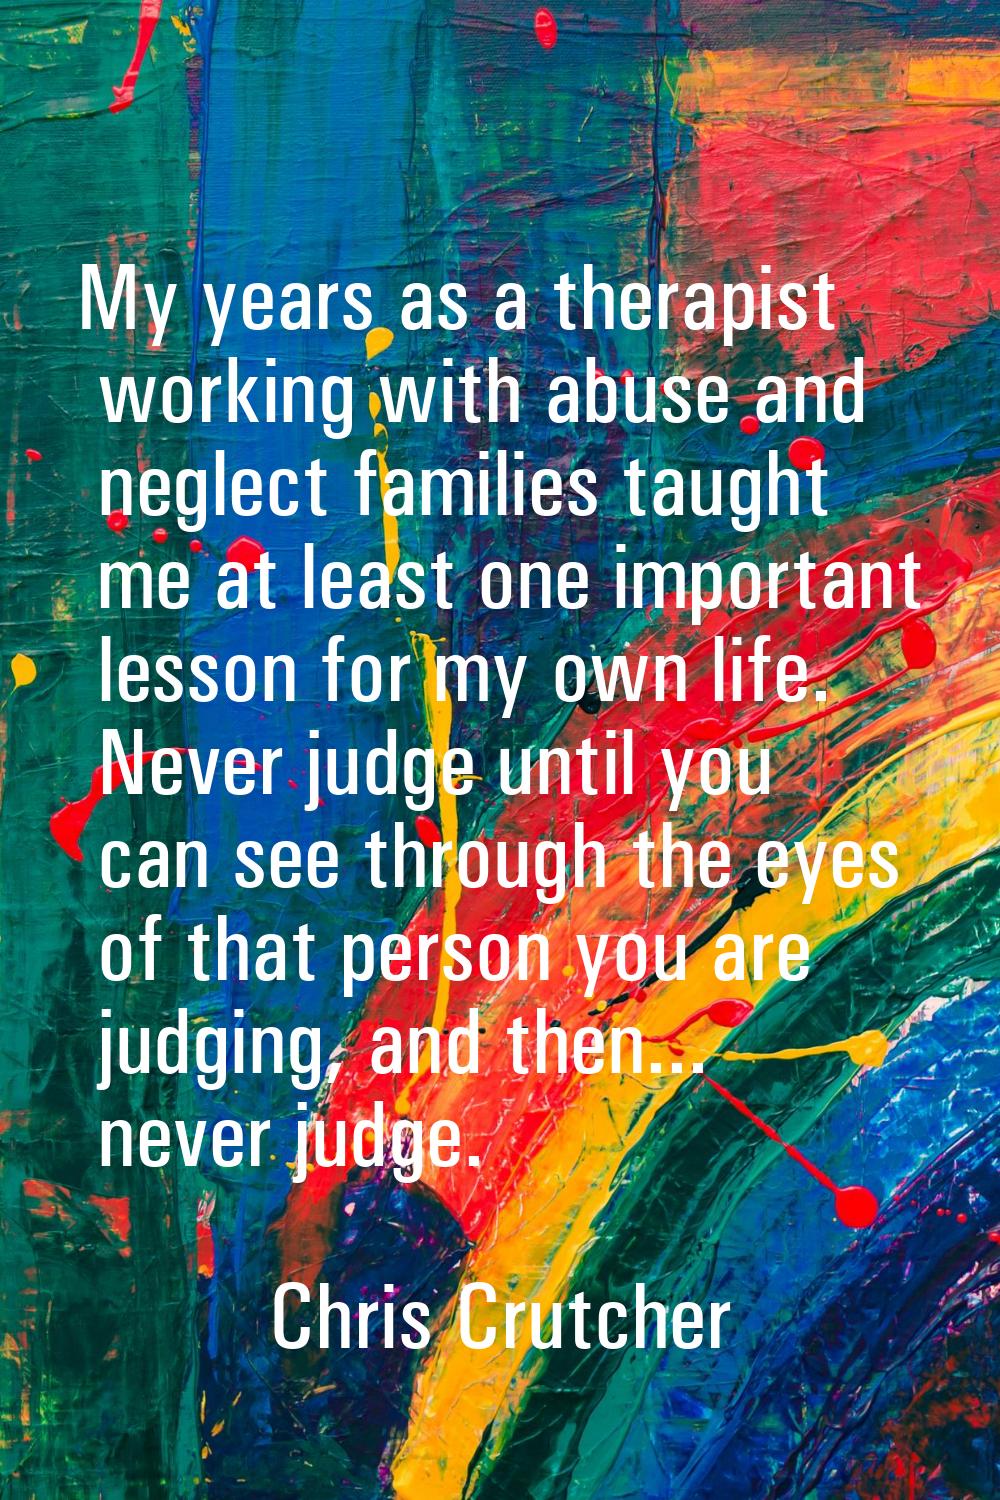 My years as a therapist working with abuse and neglect families taught me at least one important le